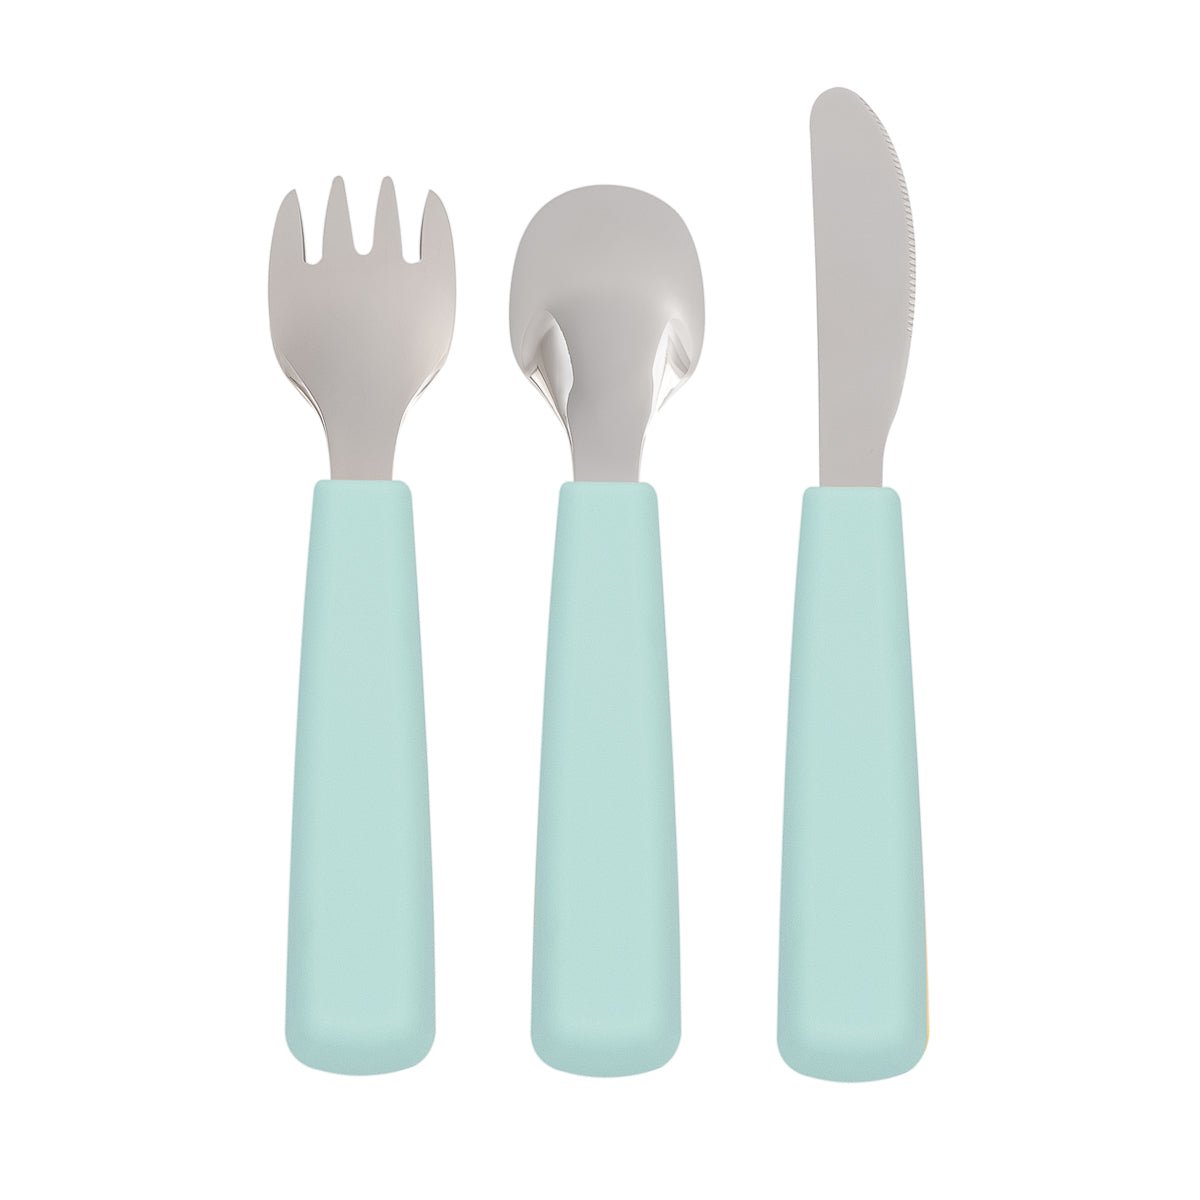 Plastic Party Spoons for sale, Shop with Afterpay